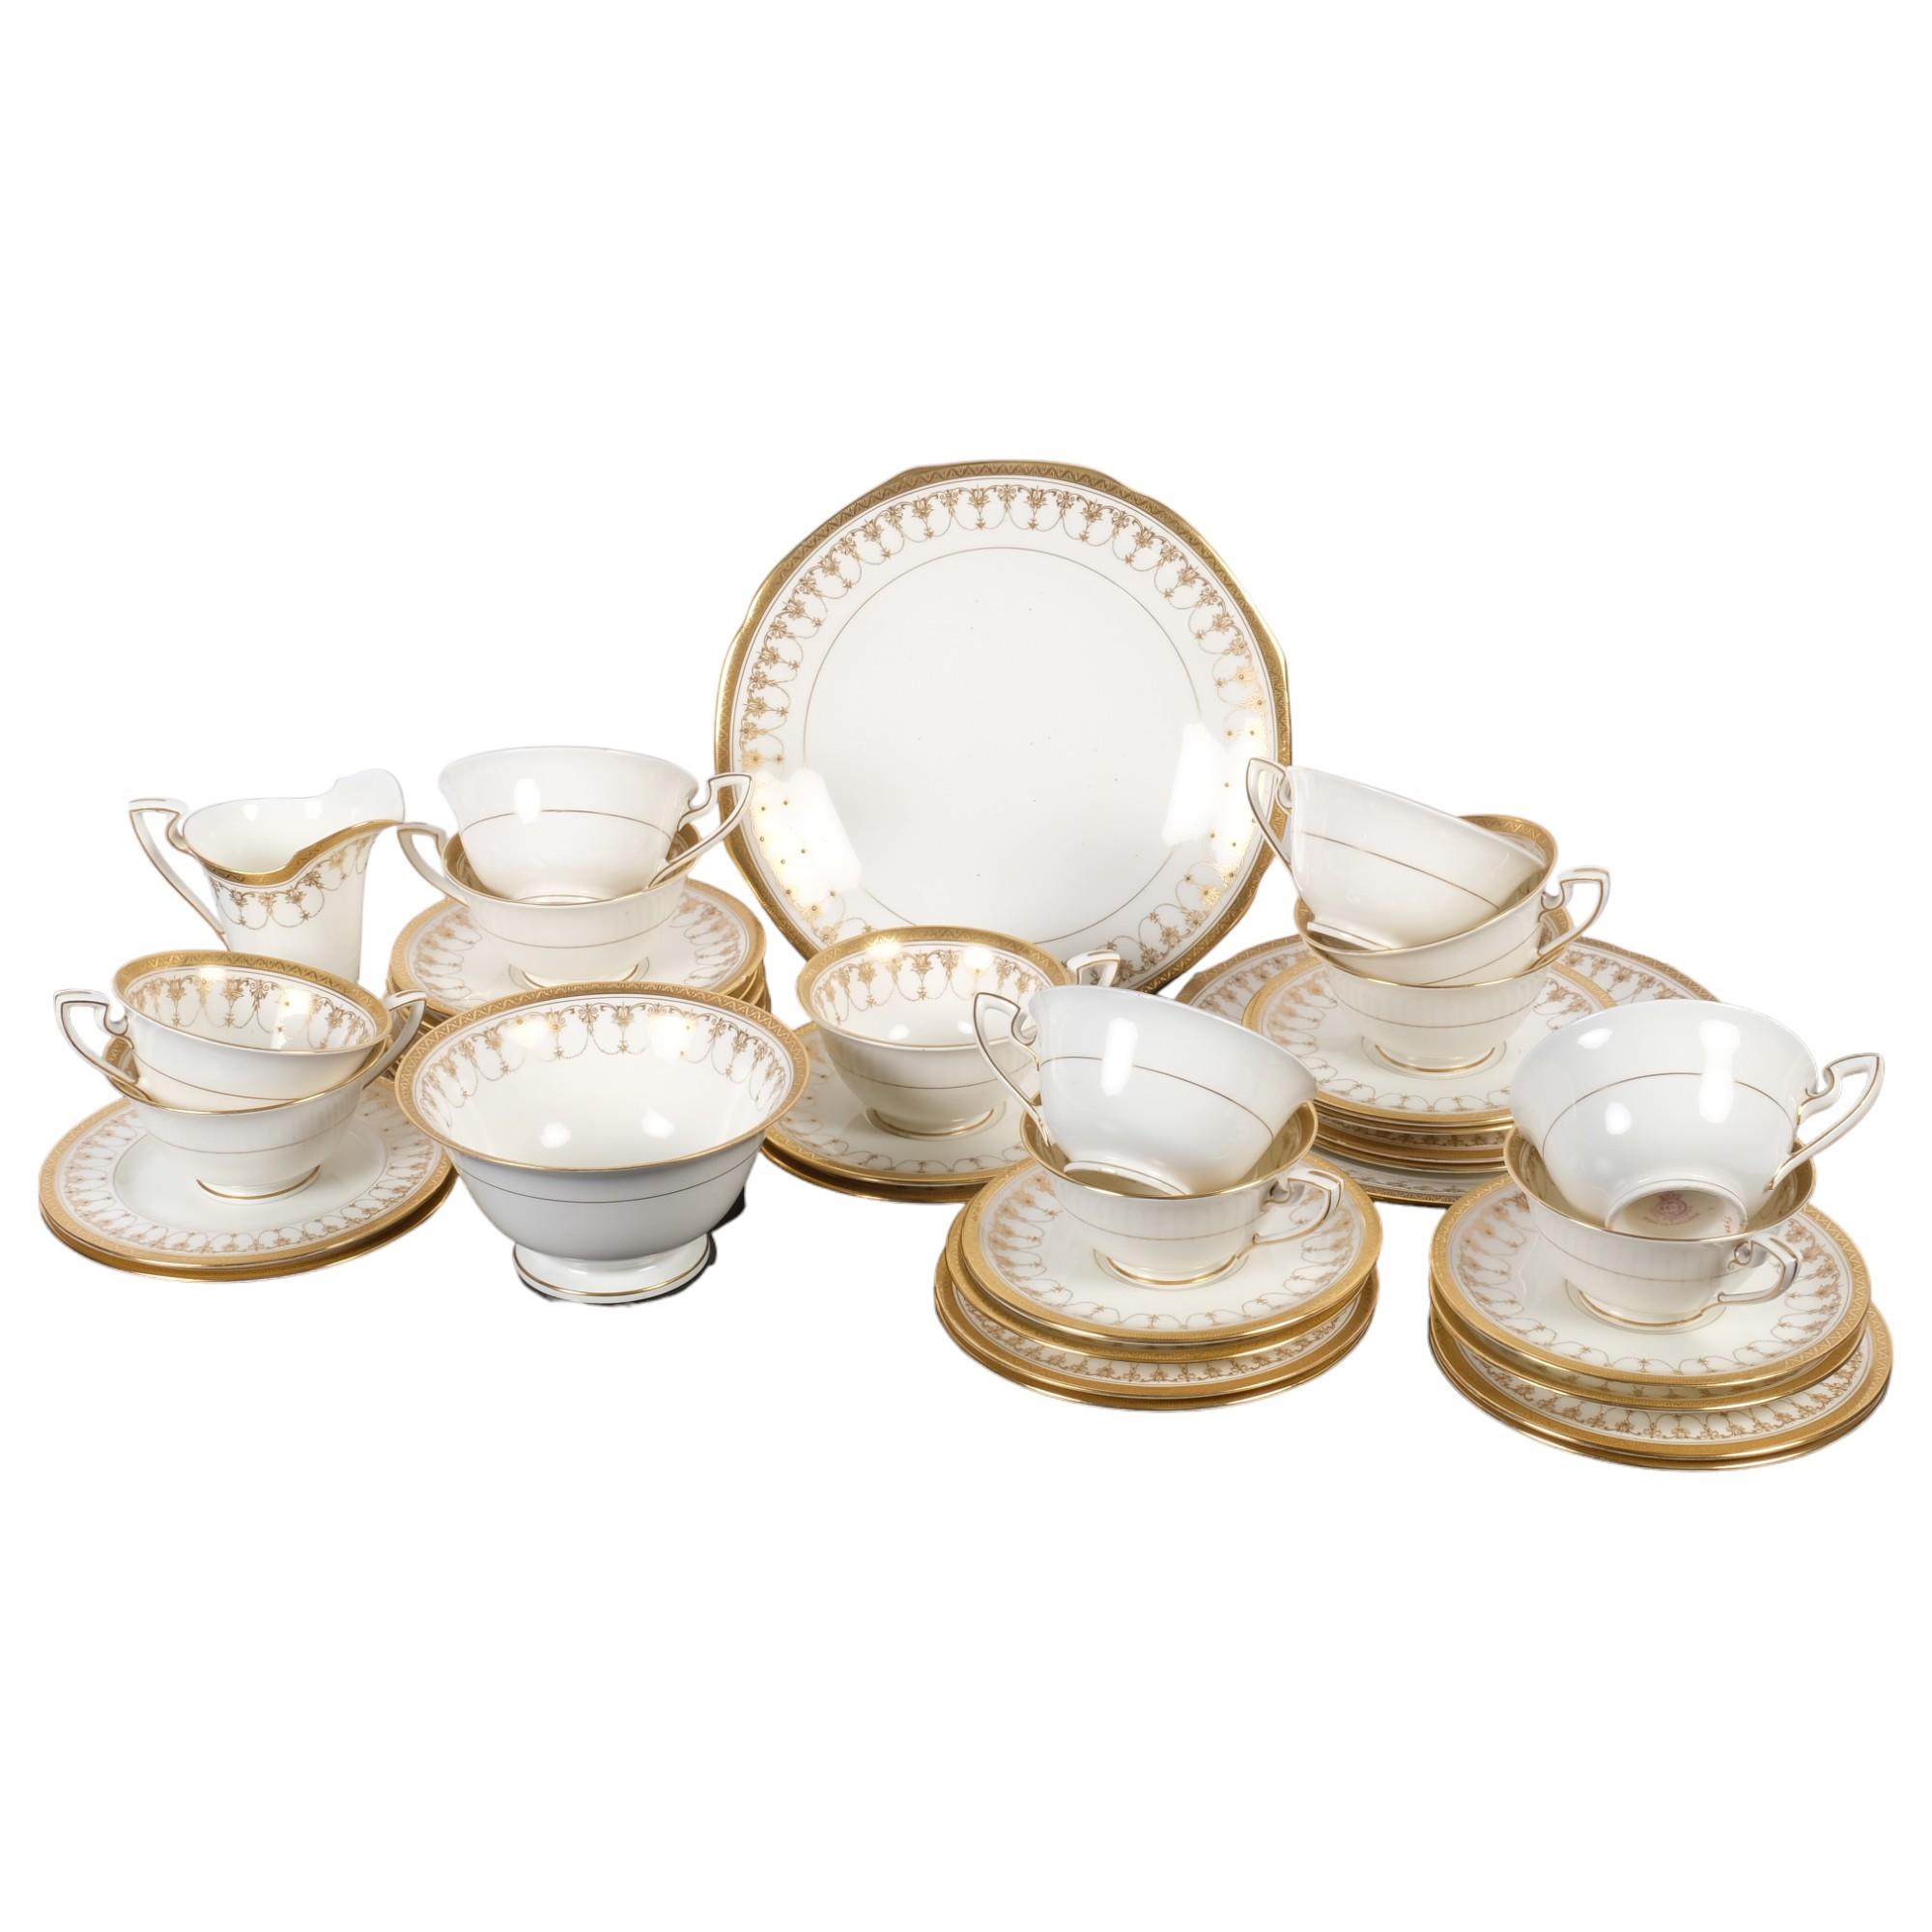 Royal Worcester tea service for 12 people, with gilded swag decoration, including 2 cake plates, jug